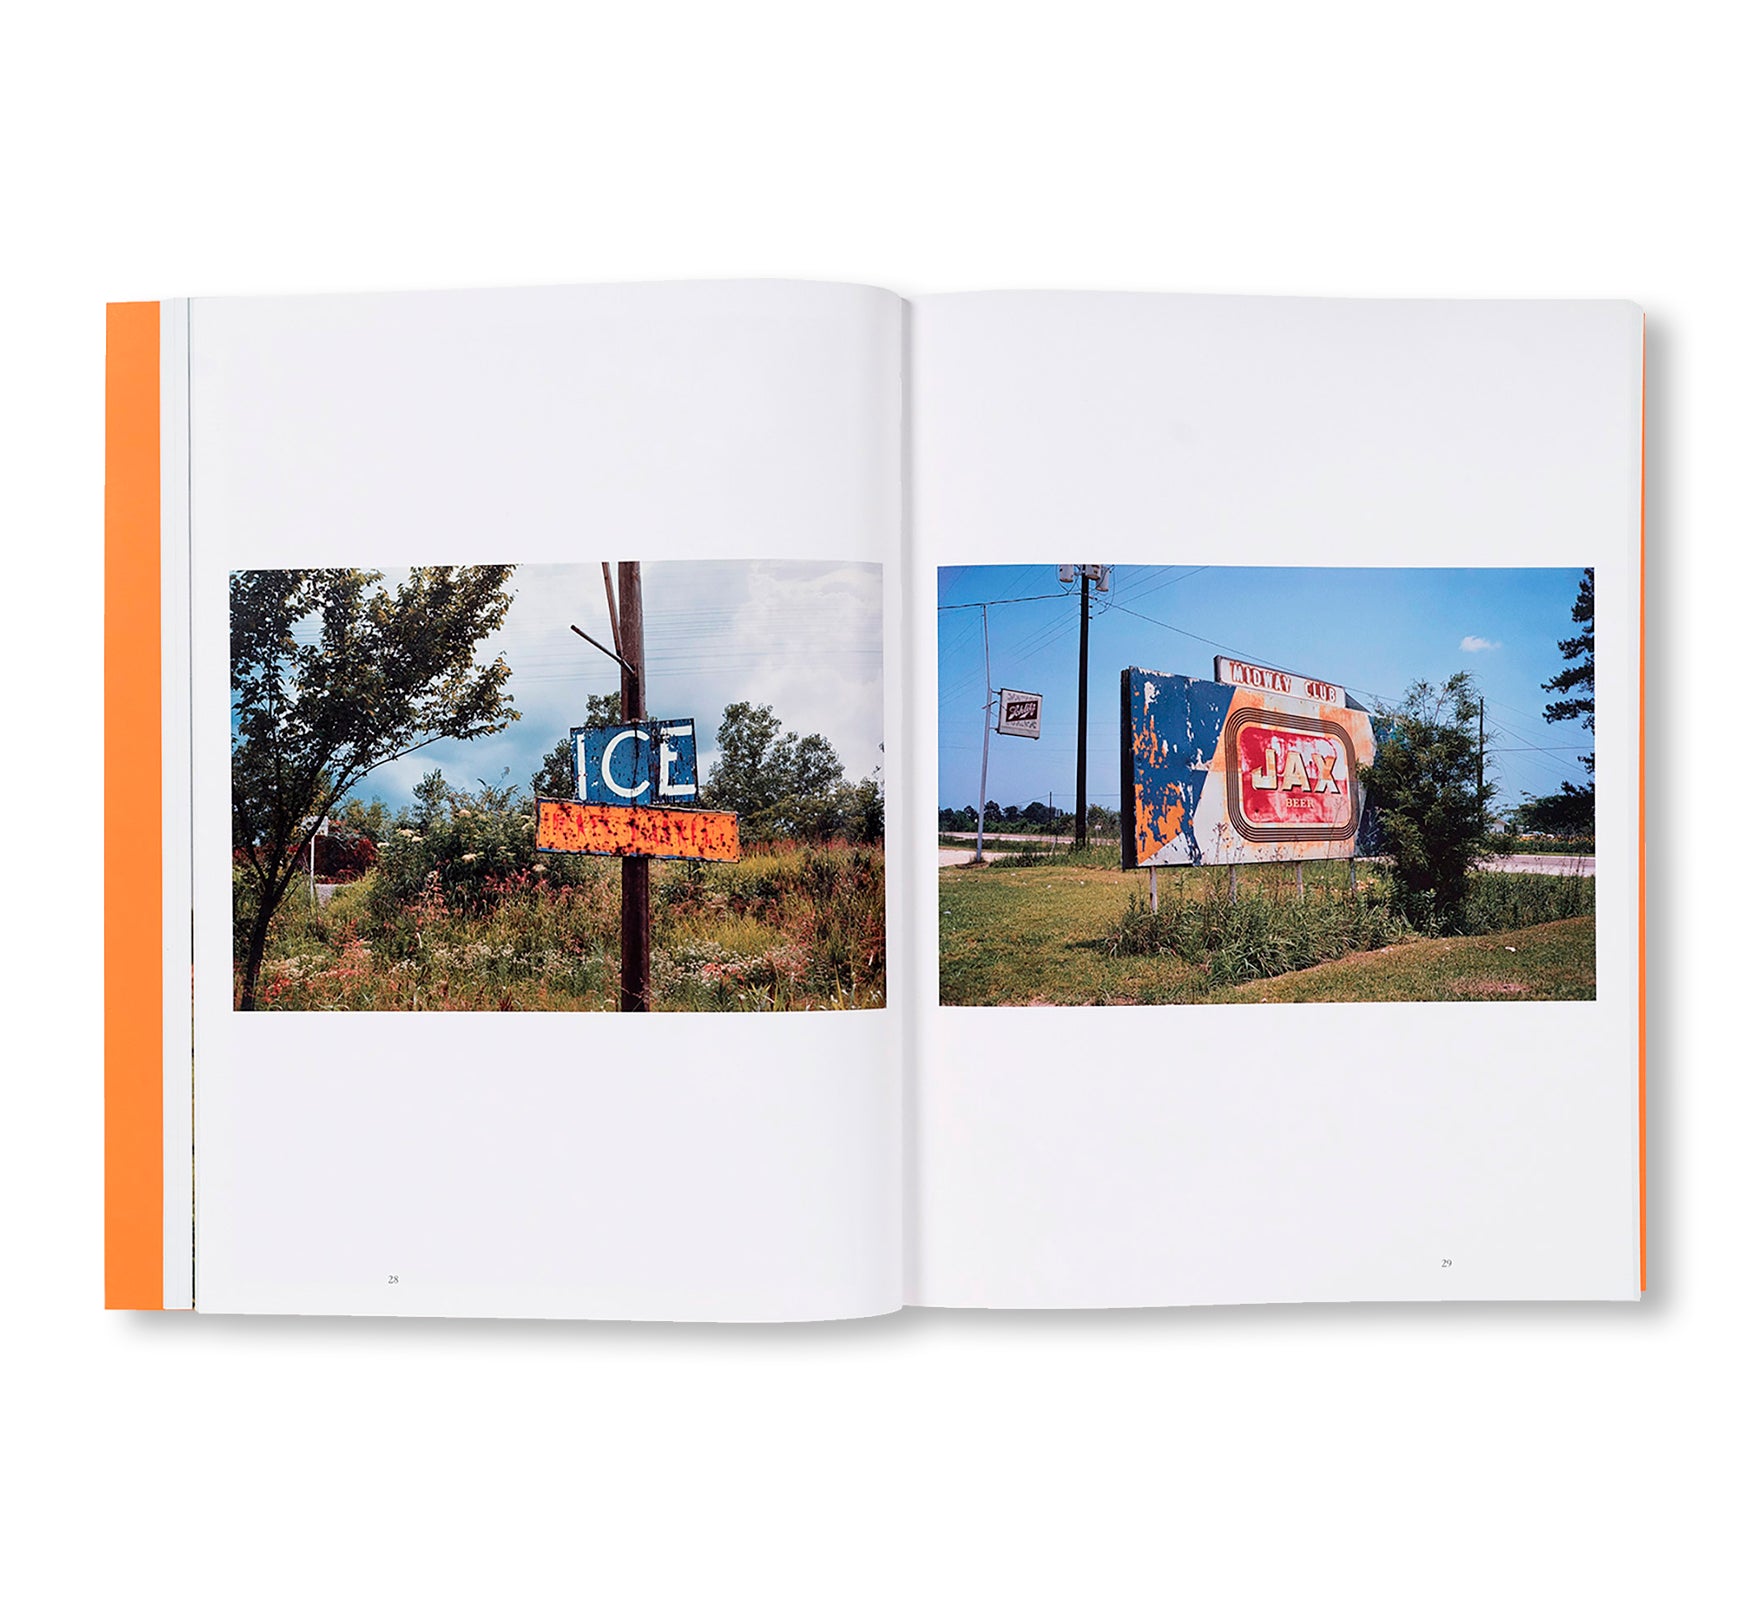 THE OUTLANDS, SELECTED WORKS by William Eggleston